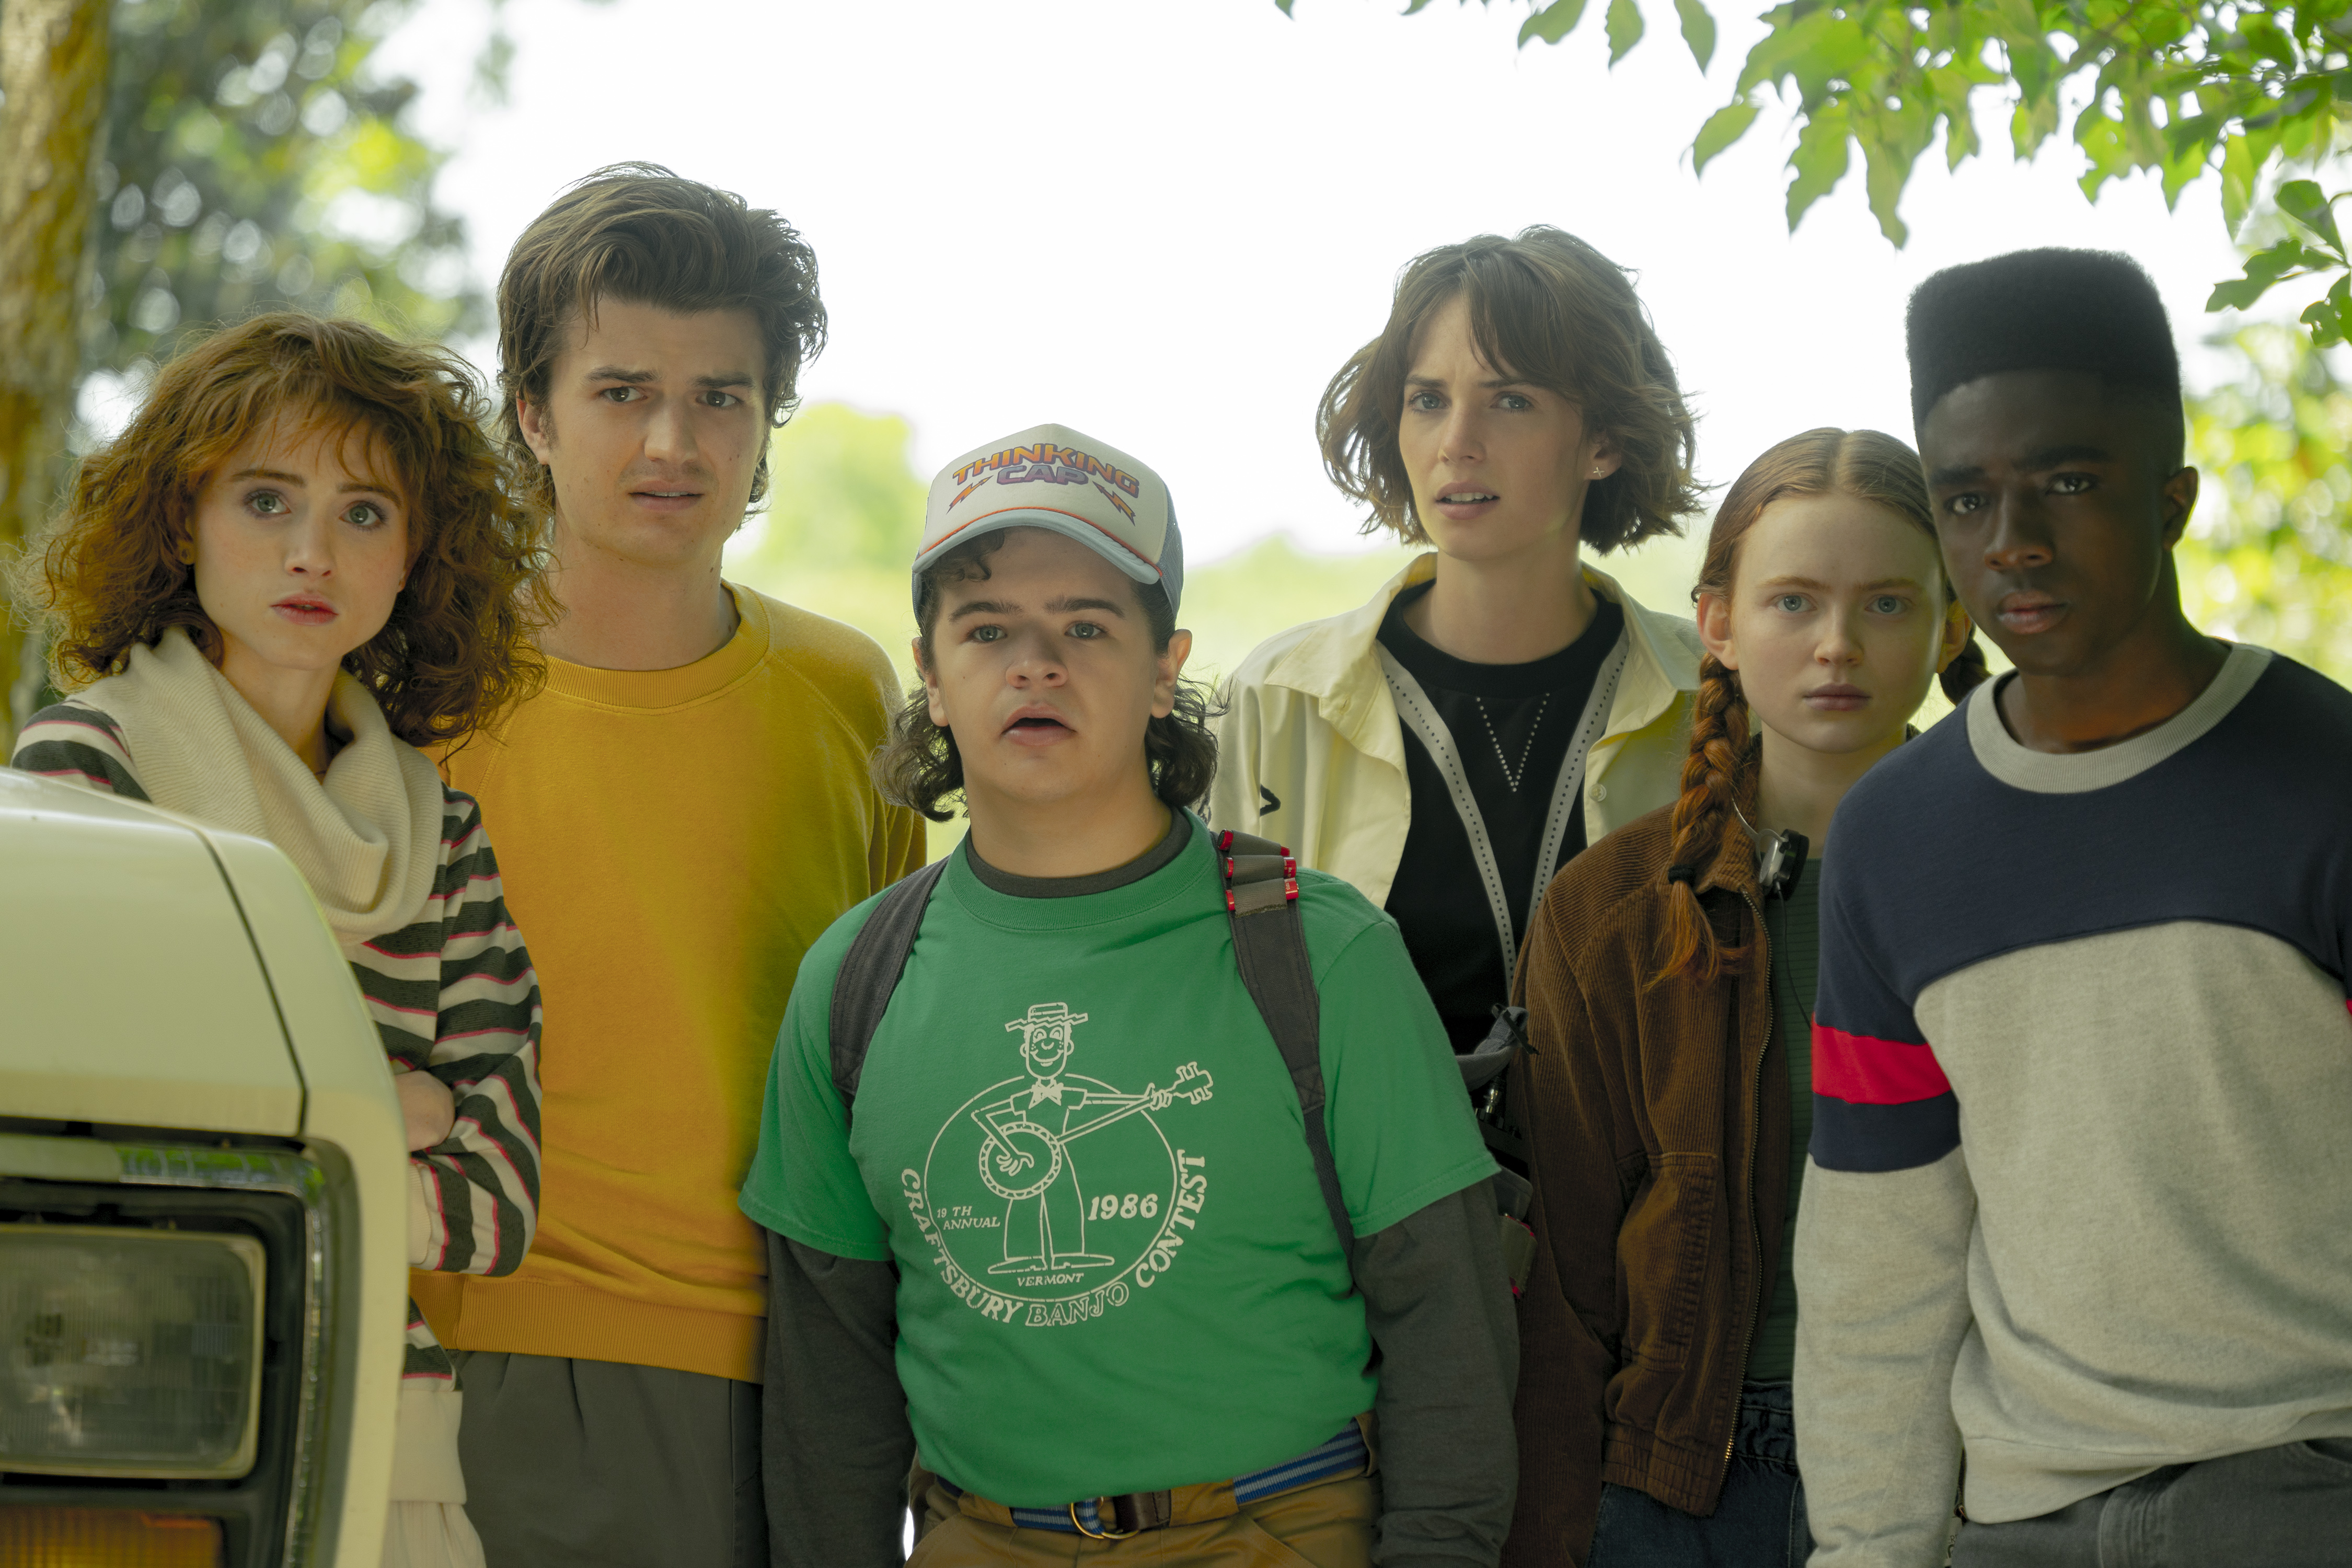 Stranger Things Play': Cast, Release Date, Plot of The First